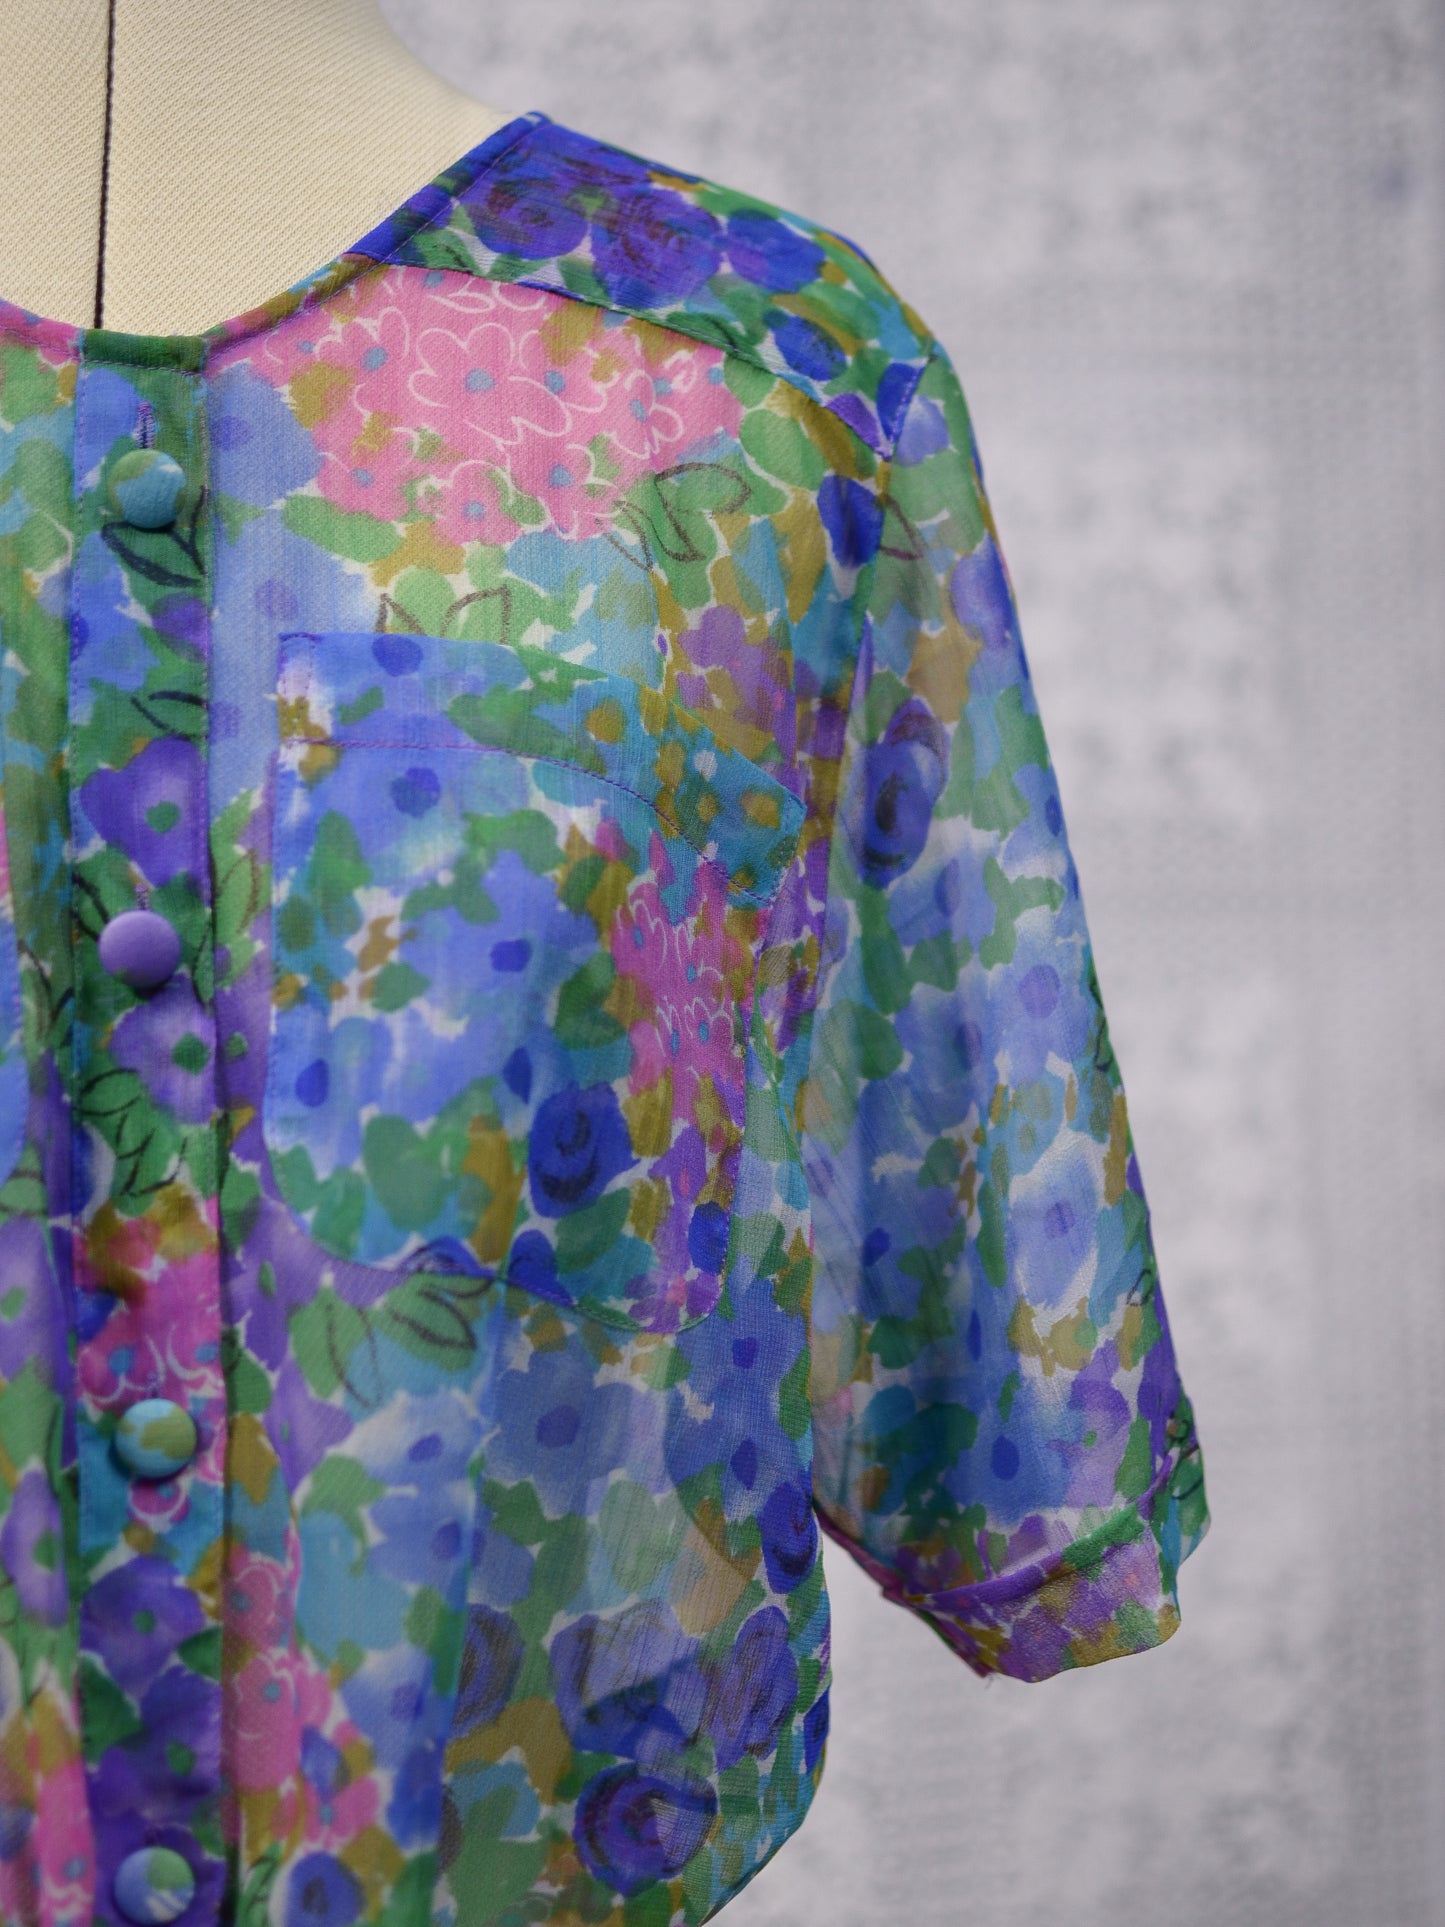 1980s blue, pink and green floral sheer button-up tie waist short sleeve blouse